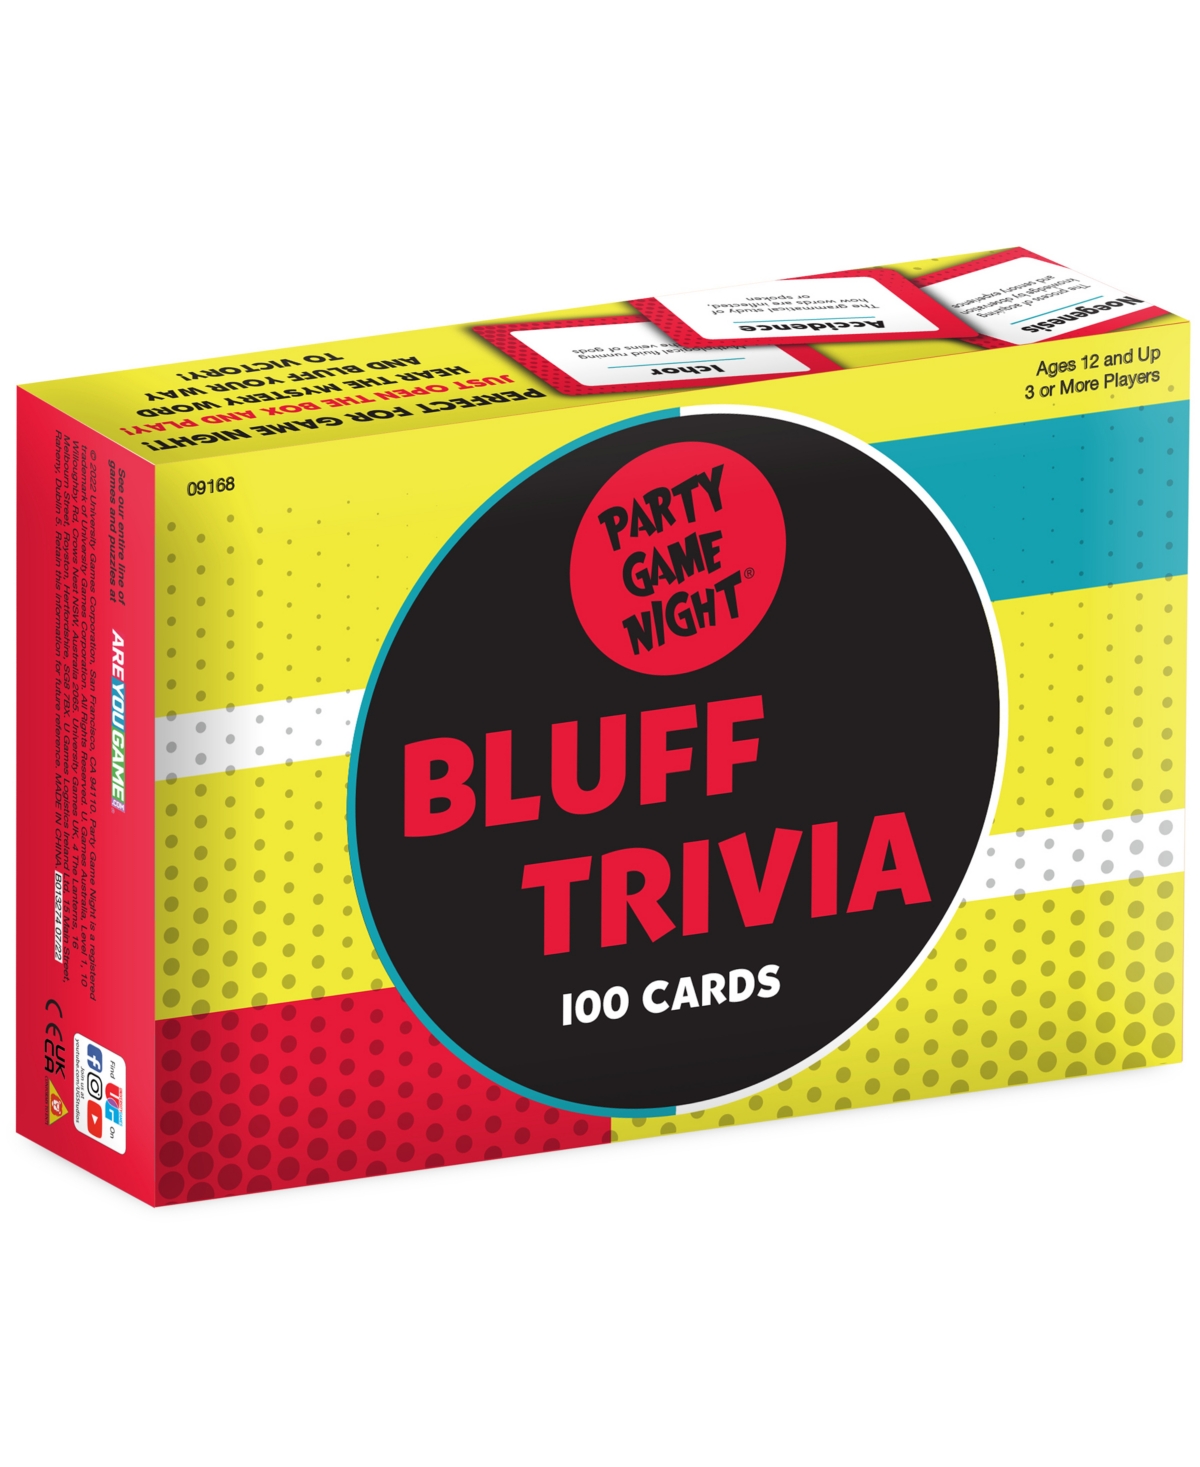 University Games Kids' Party Game Night, Bluff Trivia Cards In No Color